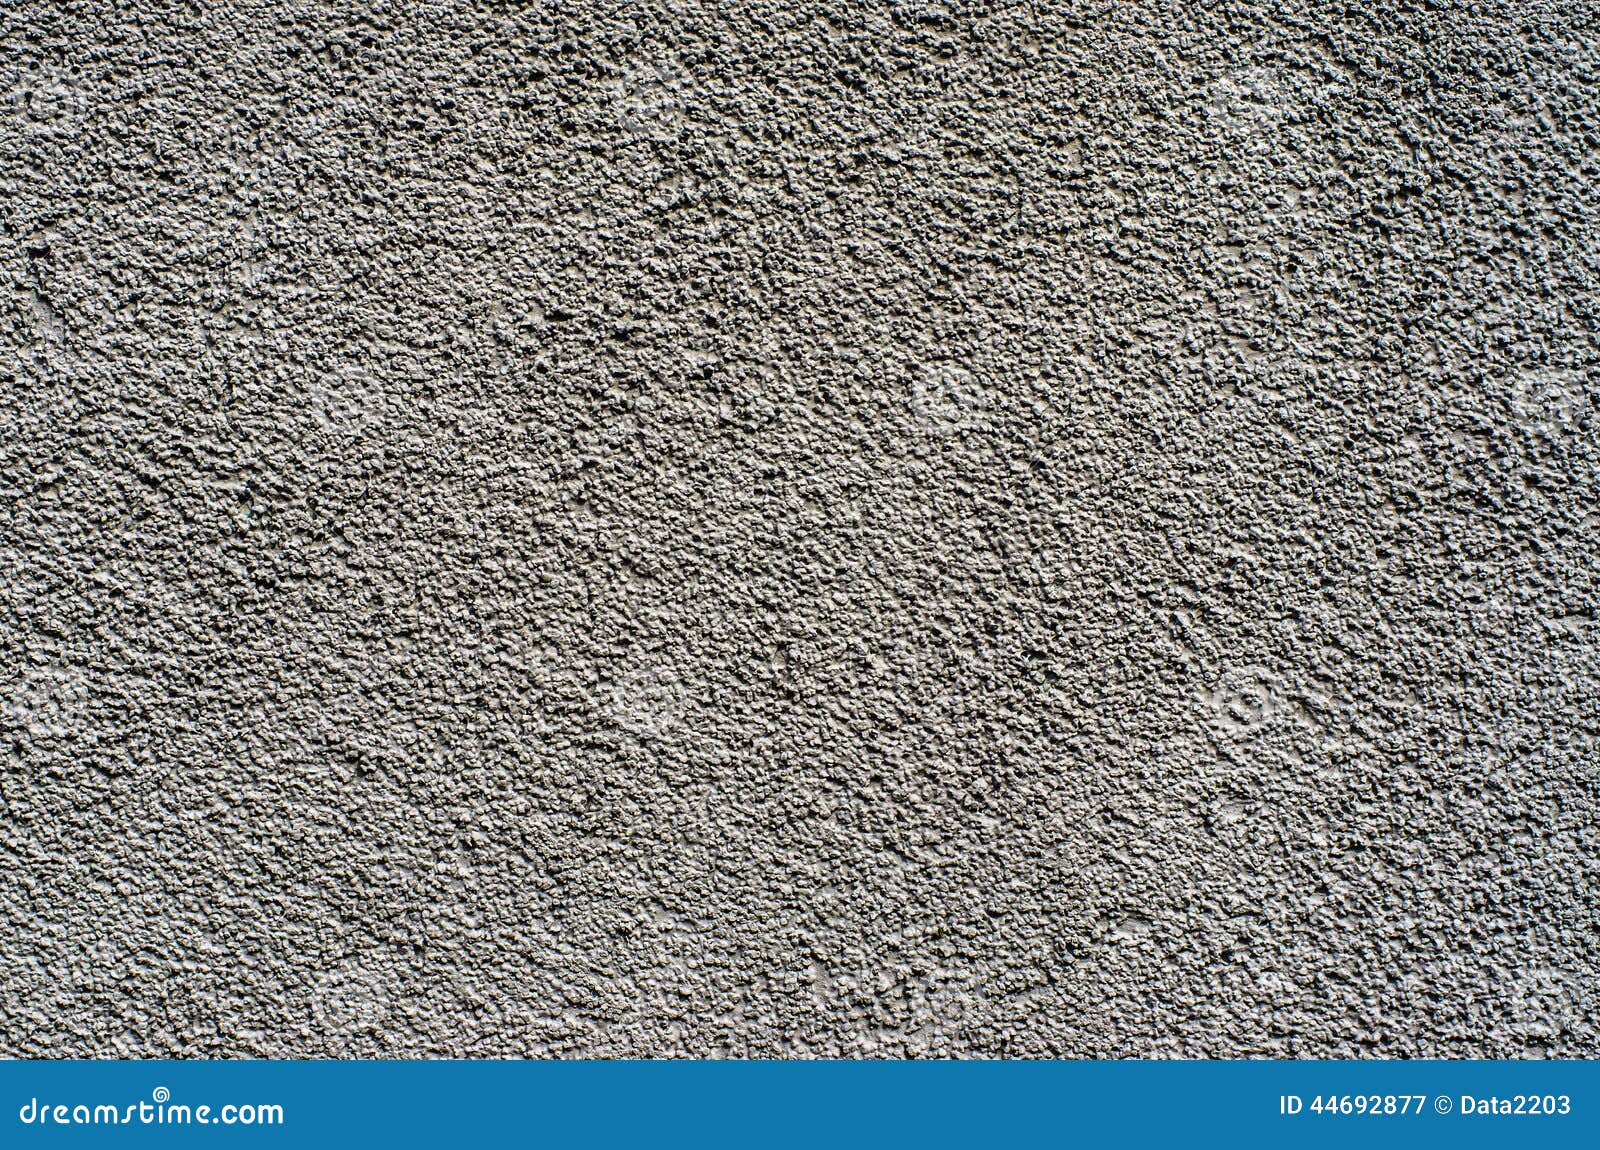 texture of a fine-grained plaster